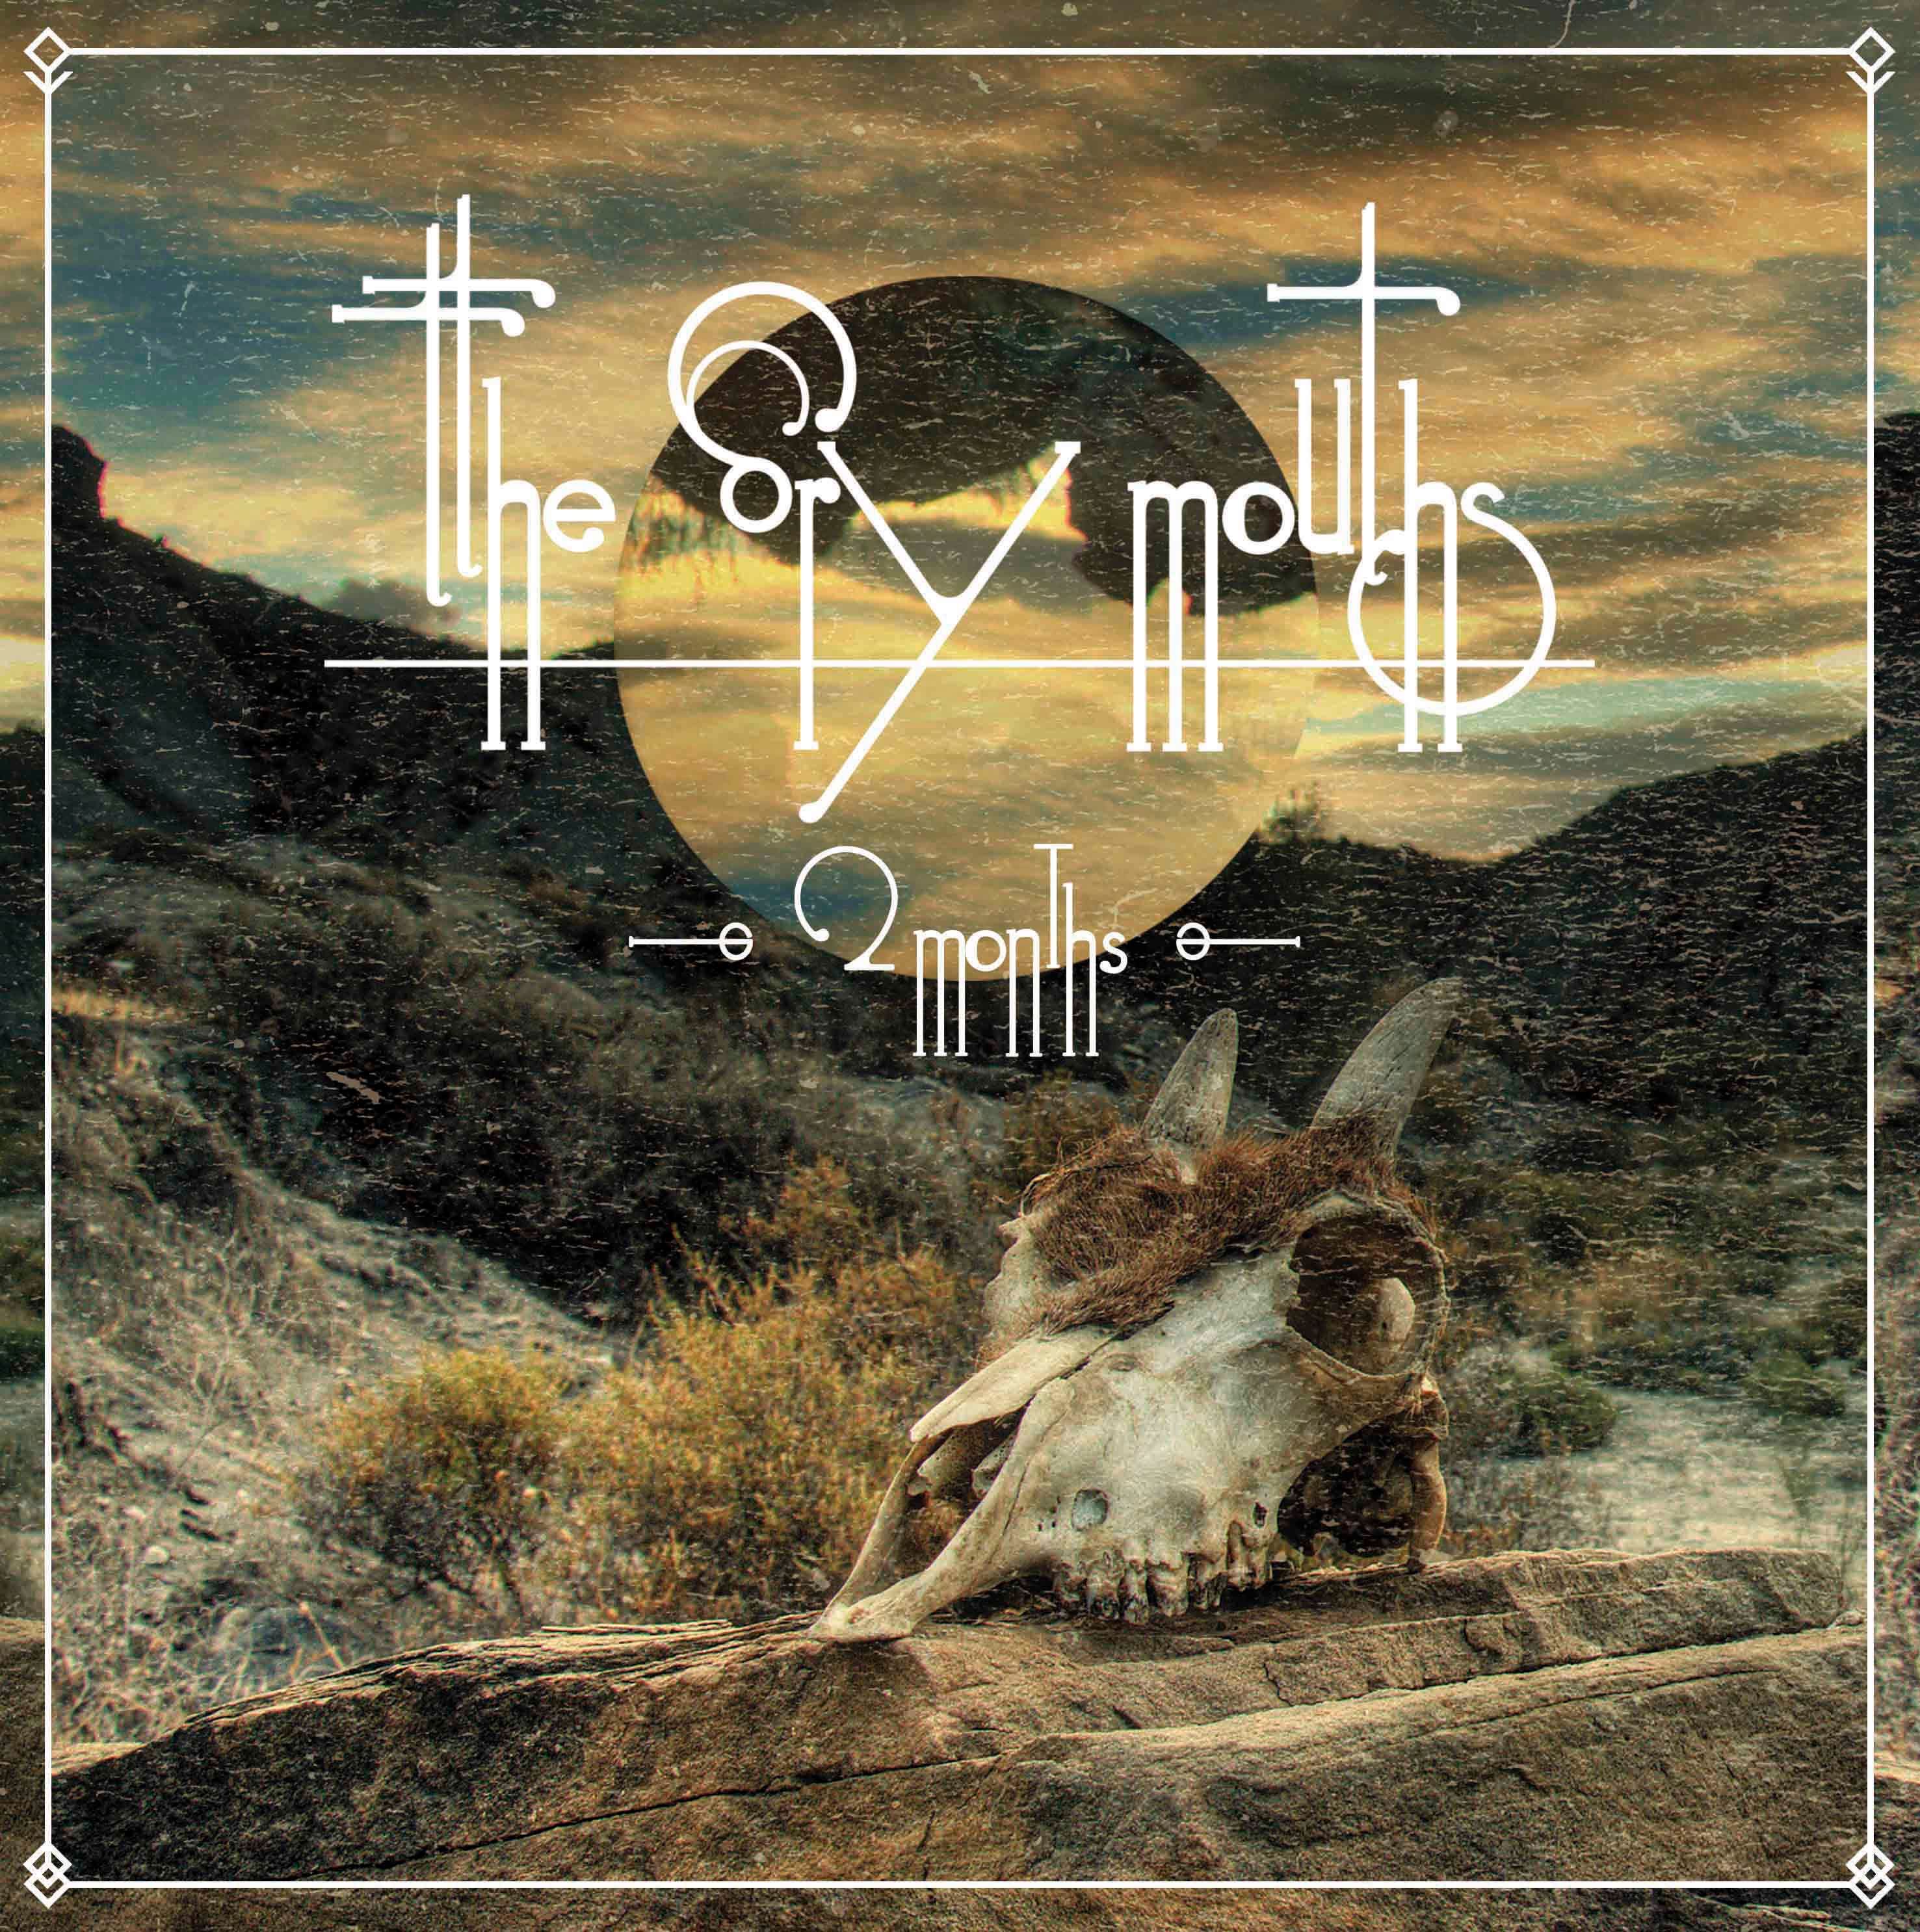 The Dry Mouths 2 Months Artwork Cover